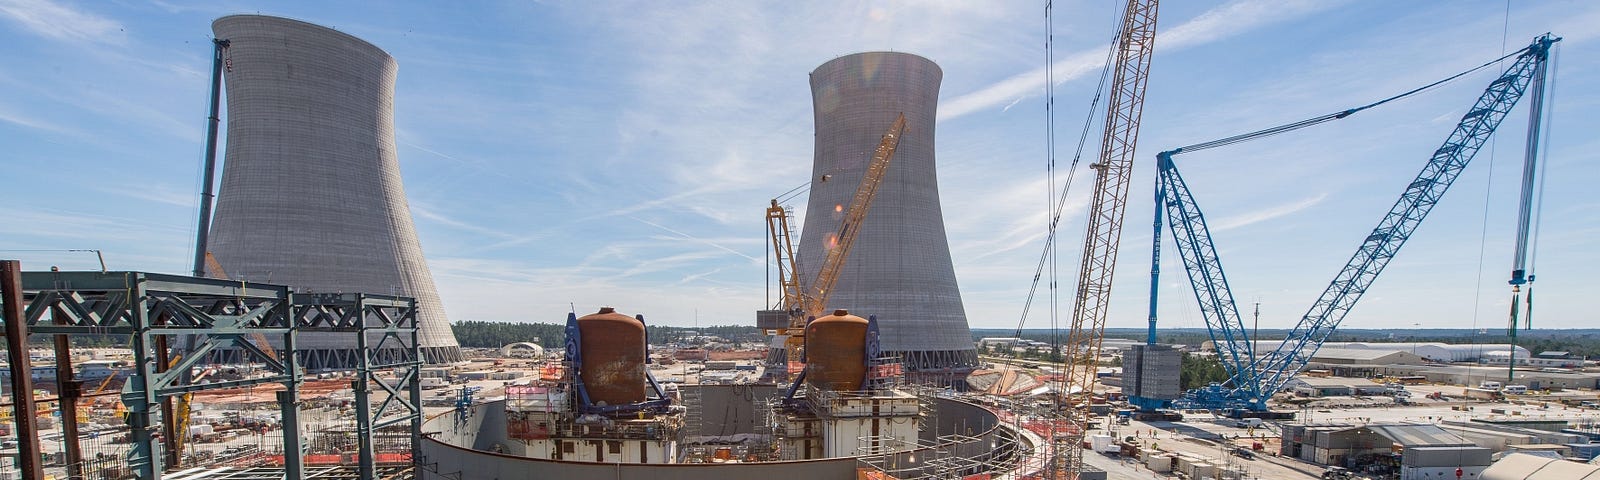 Image of behind schedule, over budget Vogtle nuclear plant